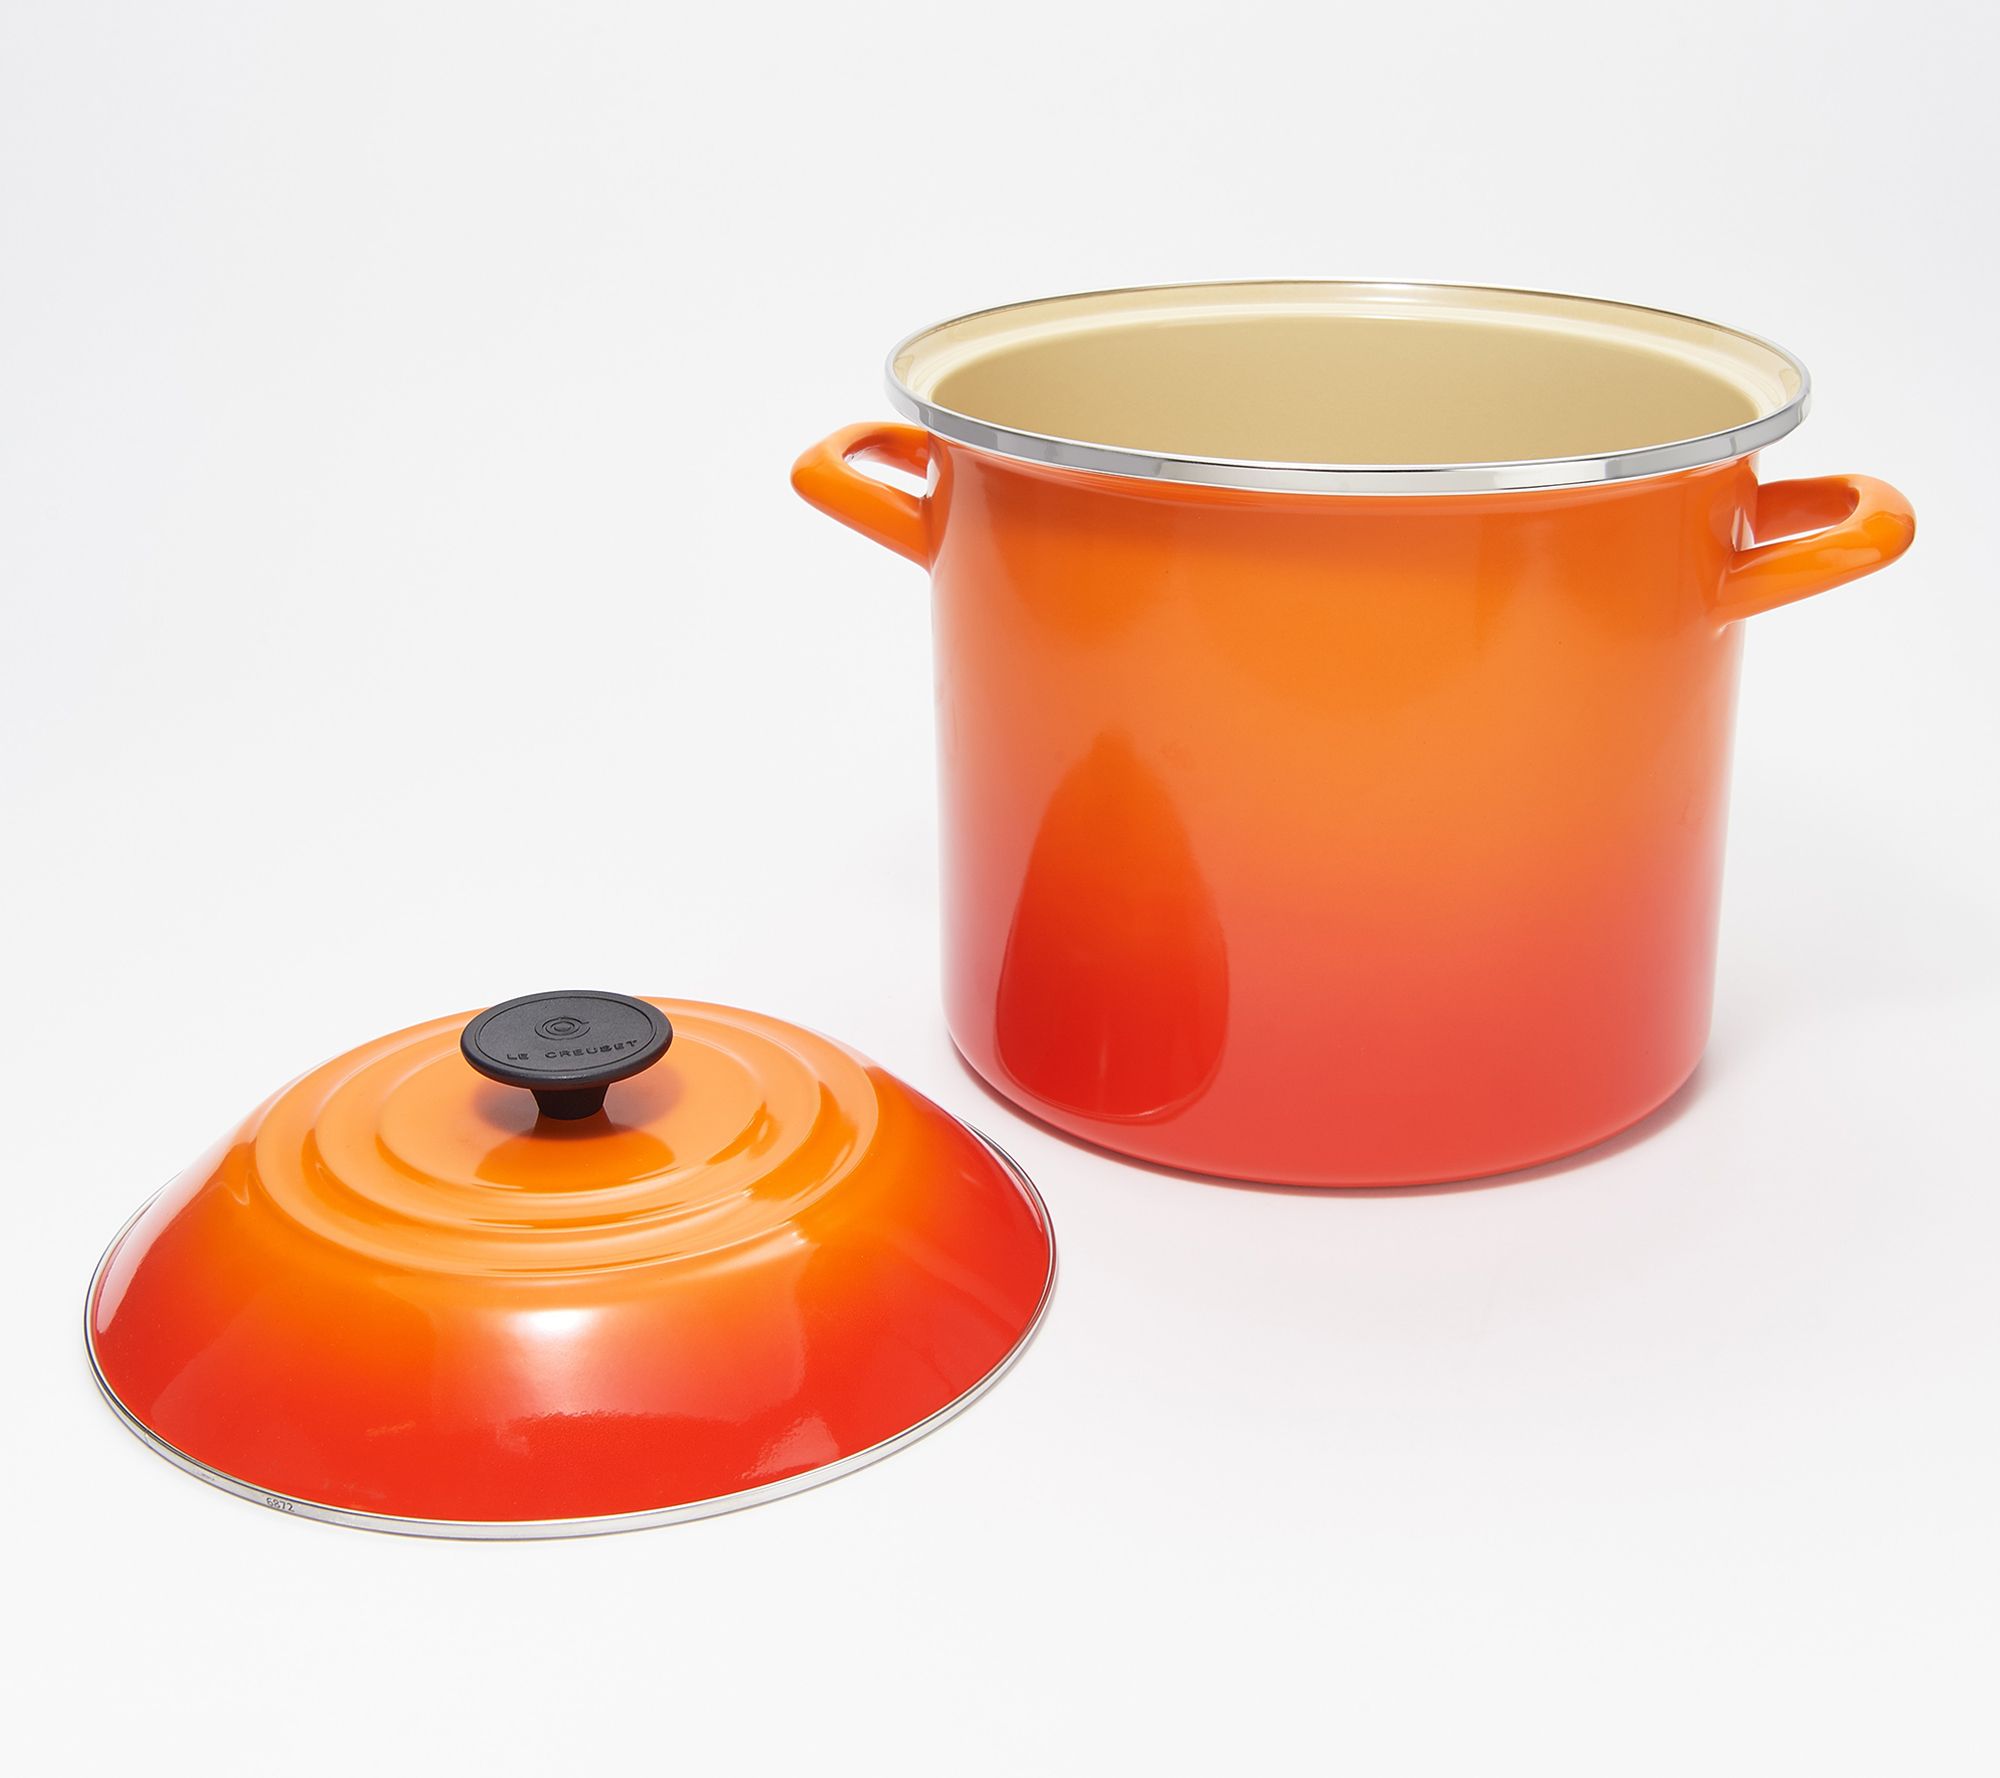 Le Creuset's Newest Stock Pot Collection is Perfect For This